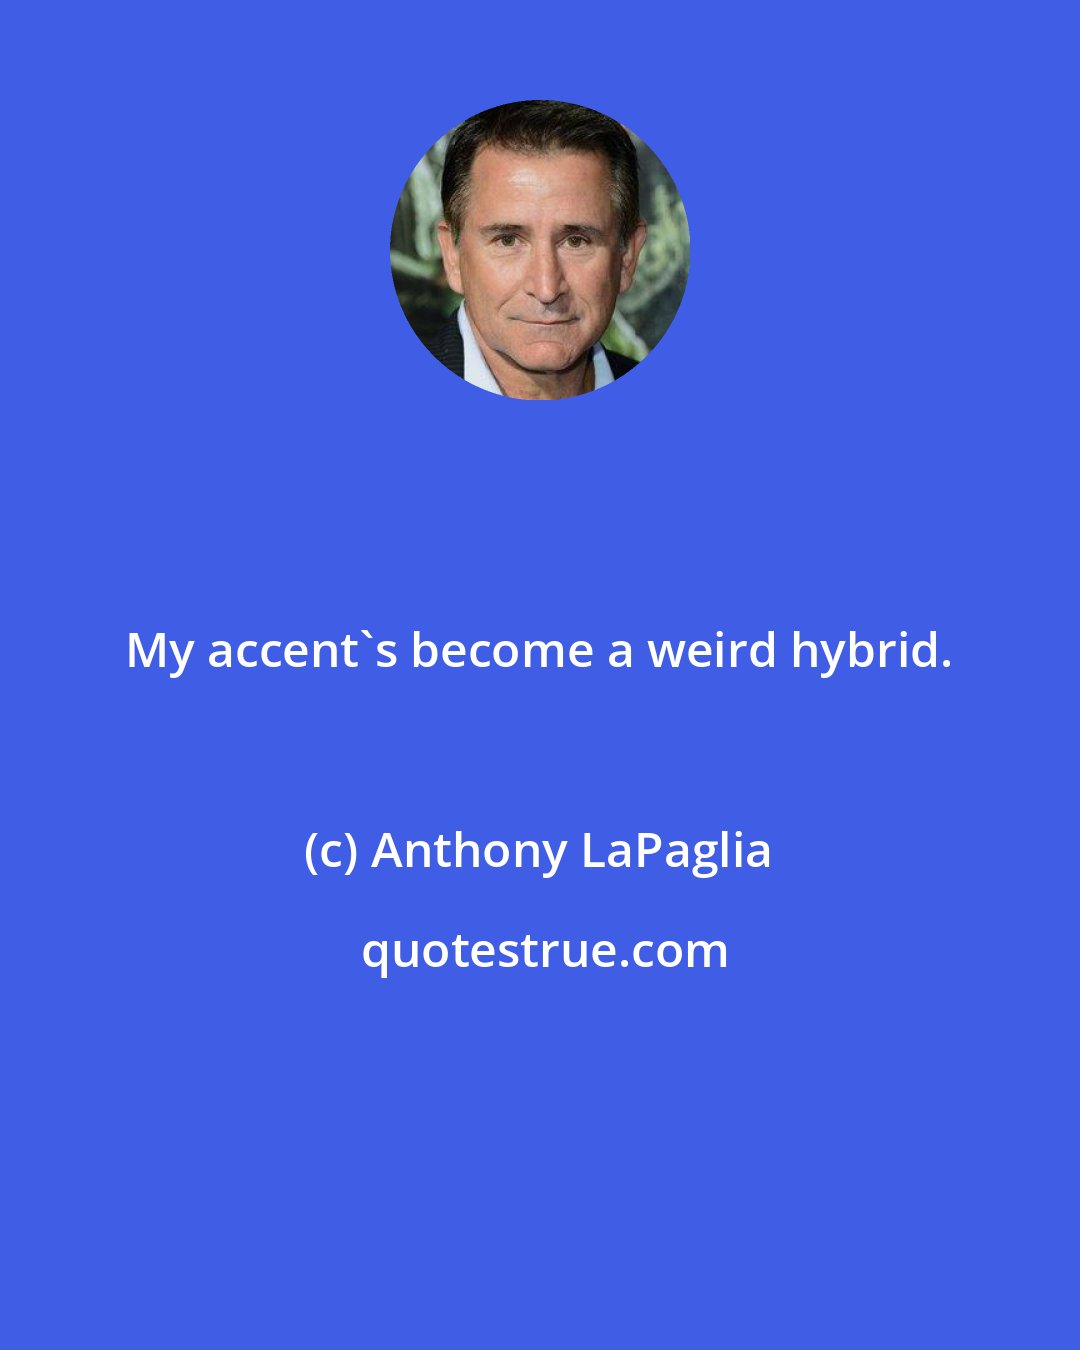 Anthony LaPaglia: My accent's become a weird hybrid.